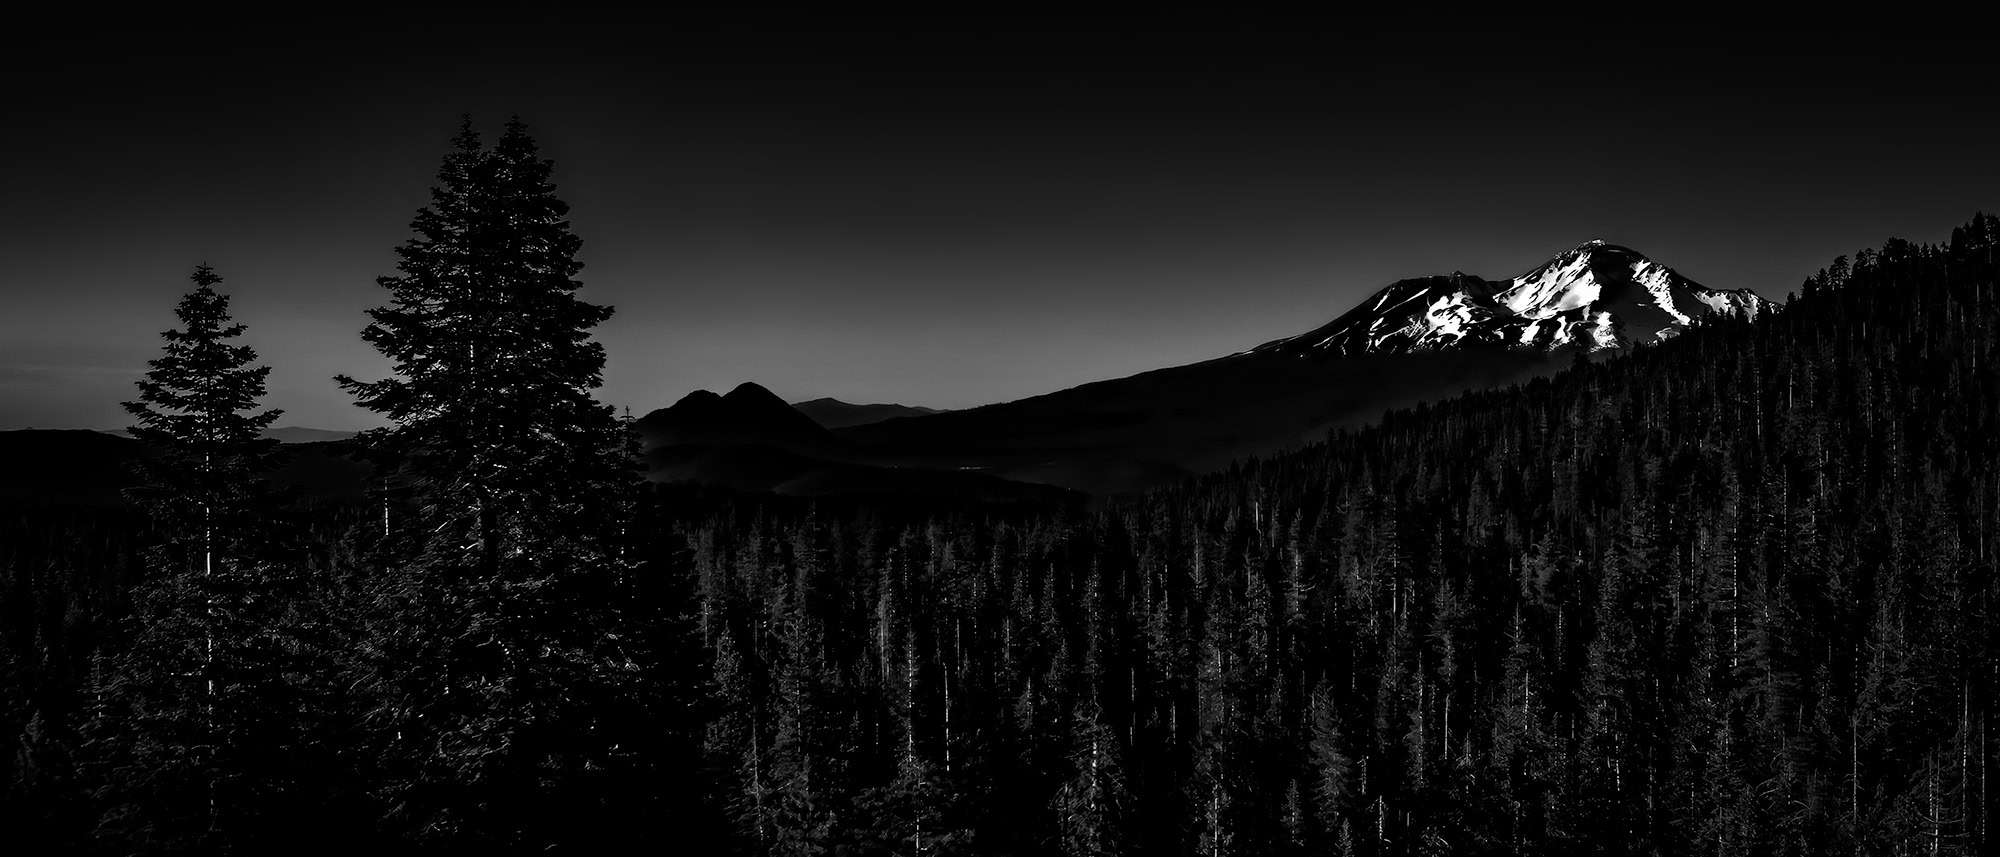 A black and white photo of an evening view of Mount Shasta and Black Butte as seen from Castle Lake